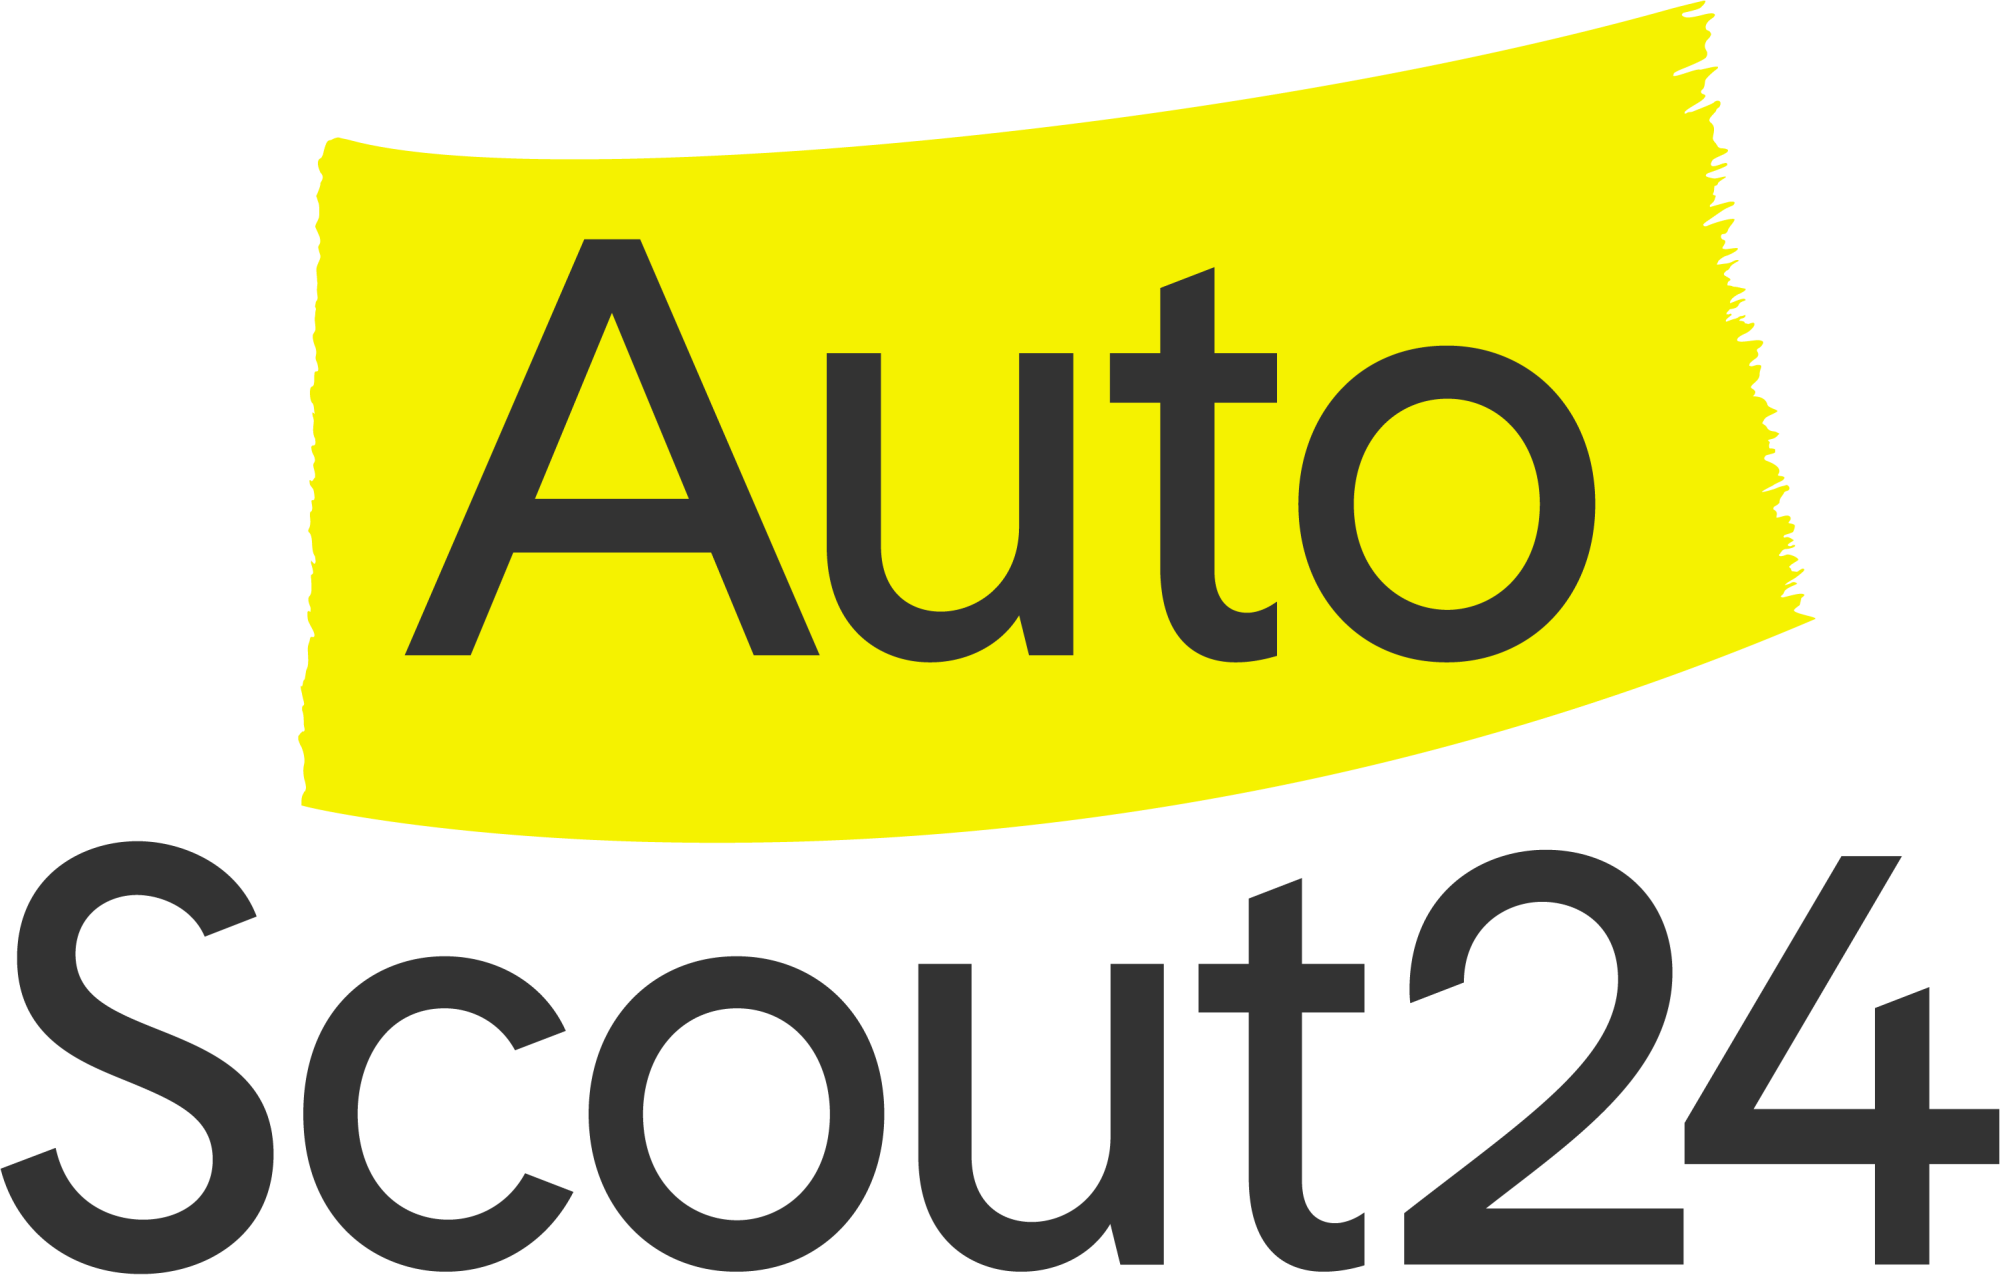 This is the AutoScout24 logo